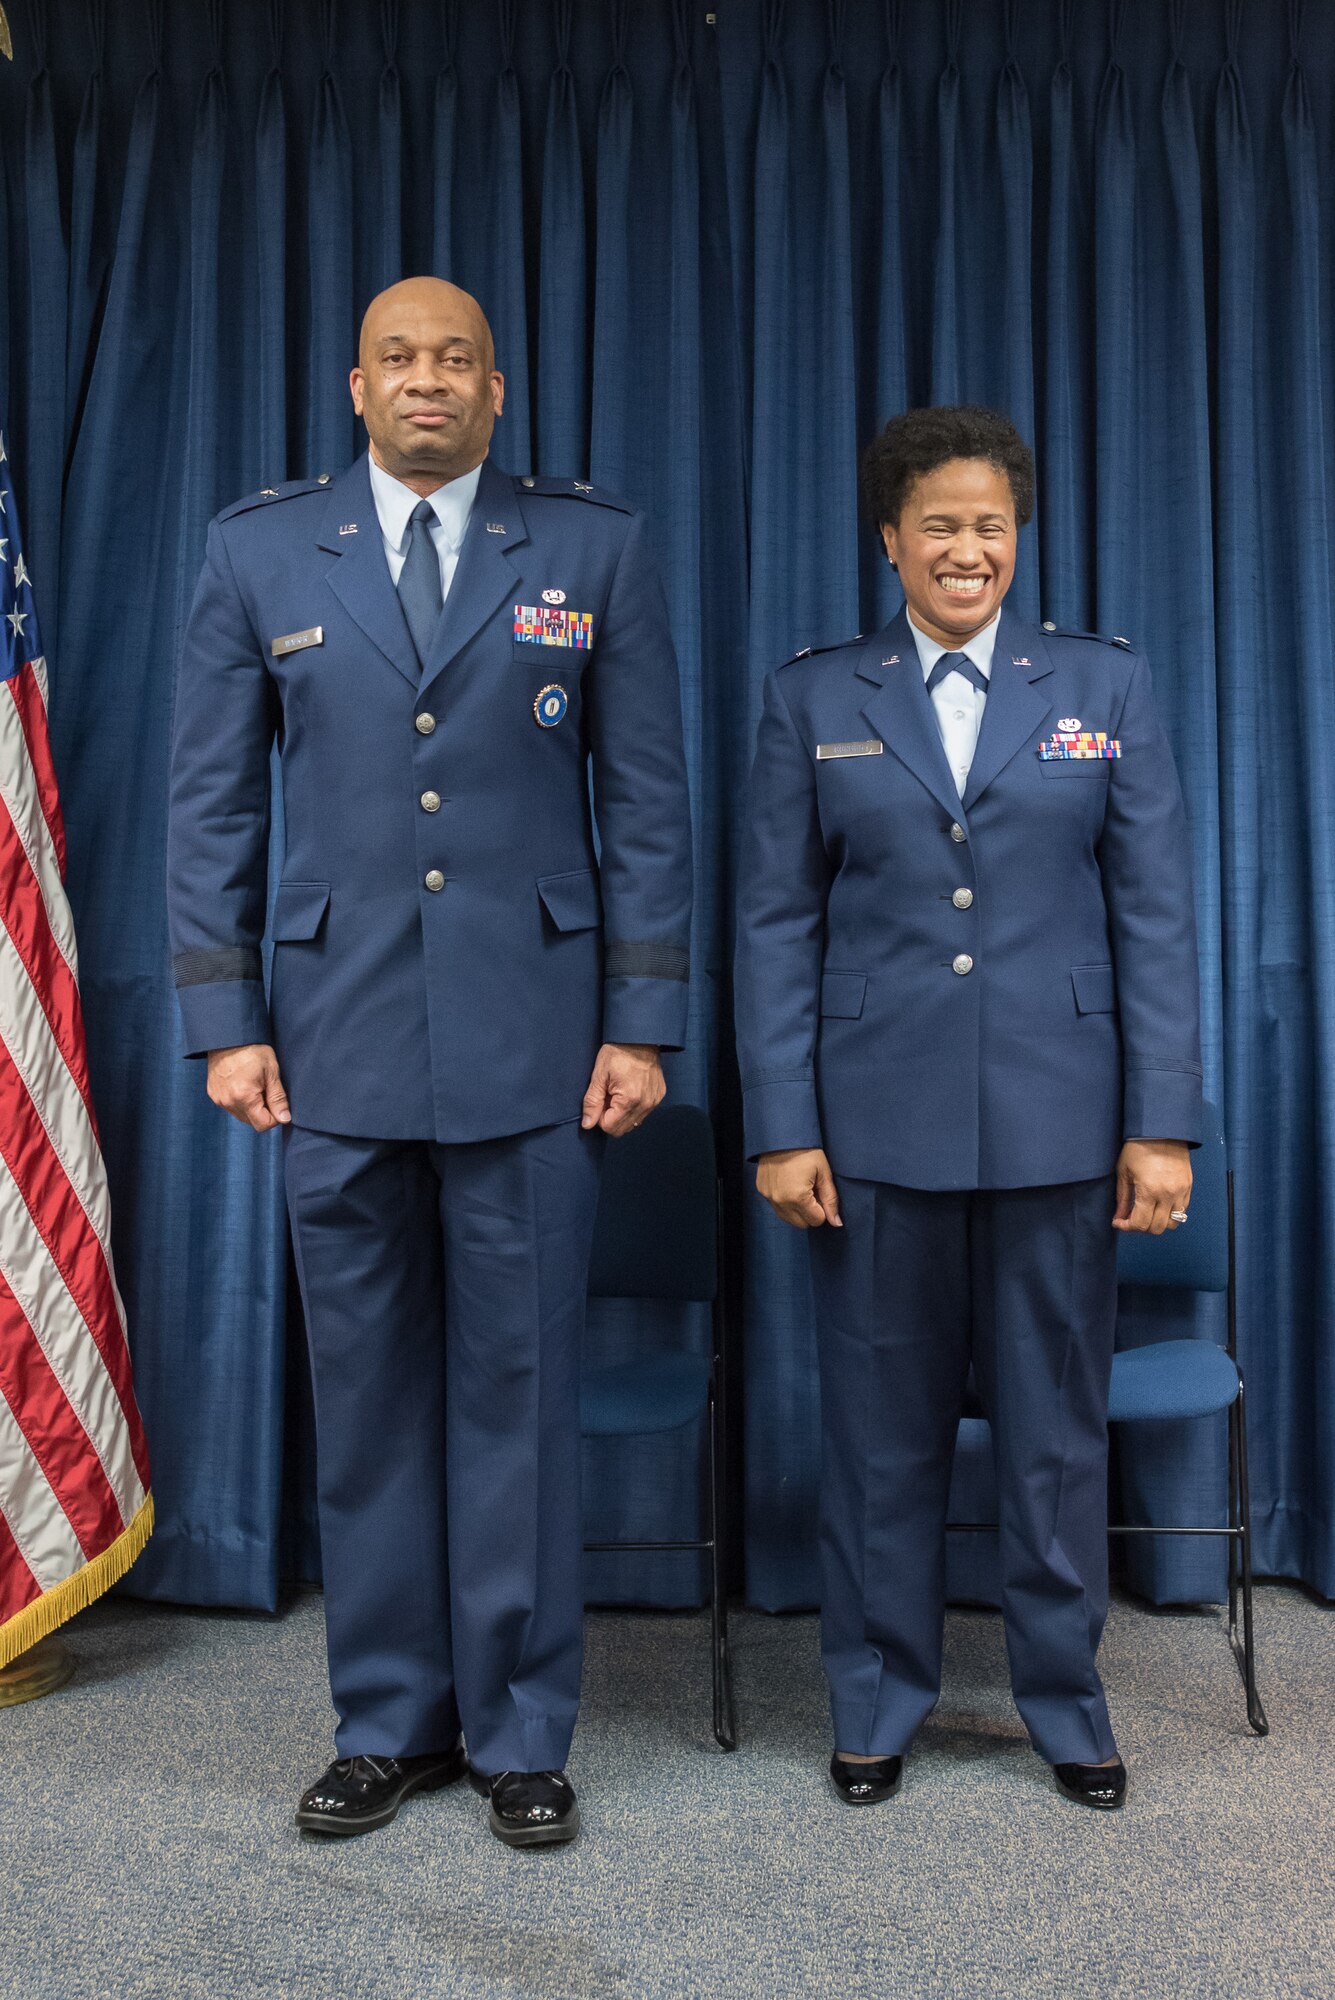 Joyce Gordon (right), state judge advocate for Headquarters, Kentucky Air National Guard, is promoted to the rank of colonel during a ceremony at the Kentucky Air National Guard Base in Louisville, Ky., April 14, 2018. The event was officiated by Brig. Gen. Charles Walker (left), chief off staff for Headquarters, Kentucky Air National Guard.